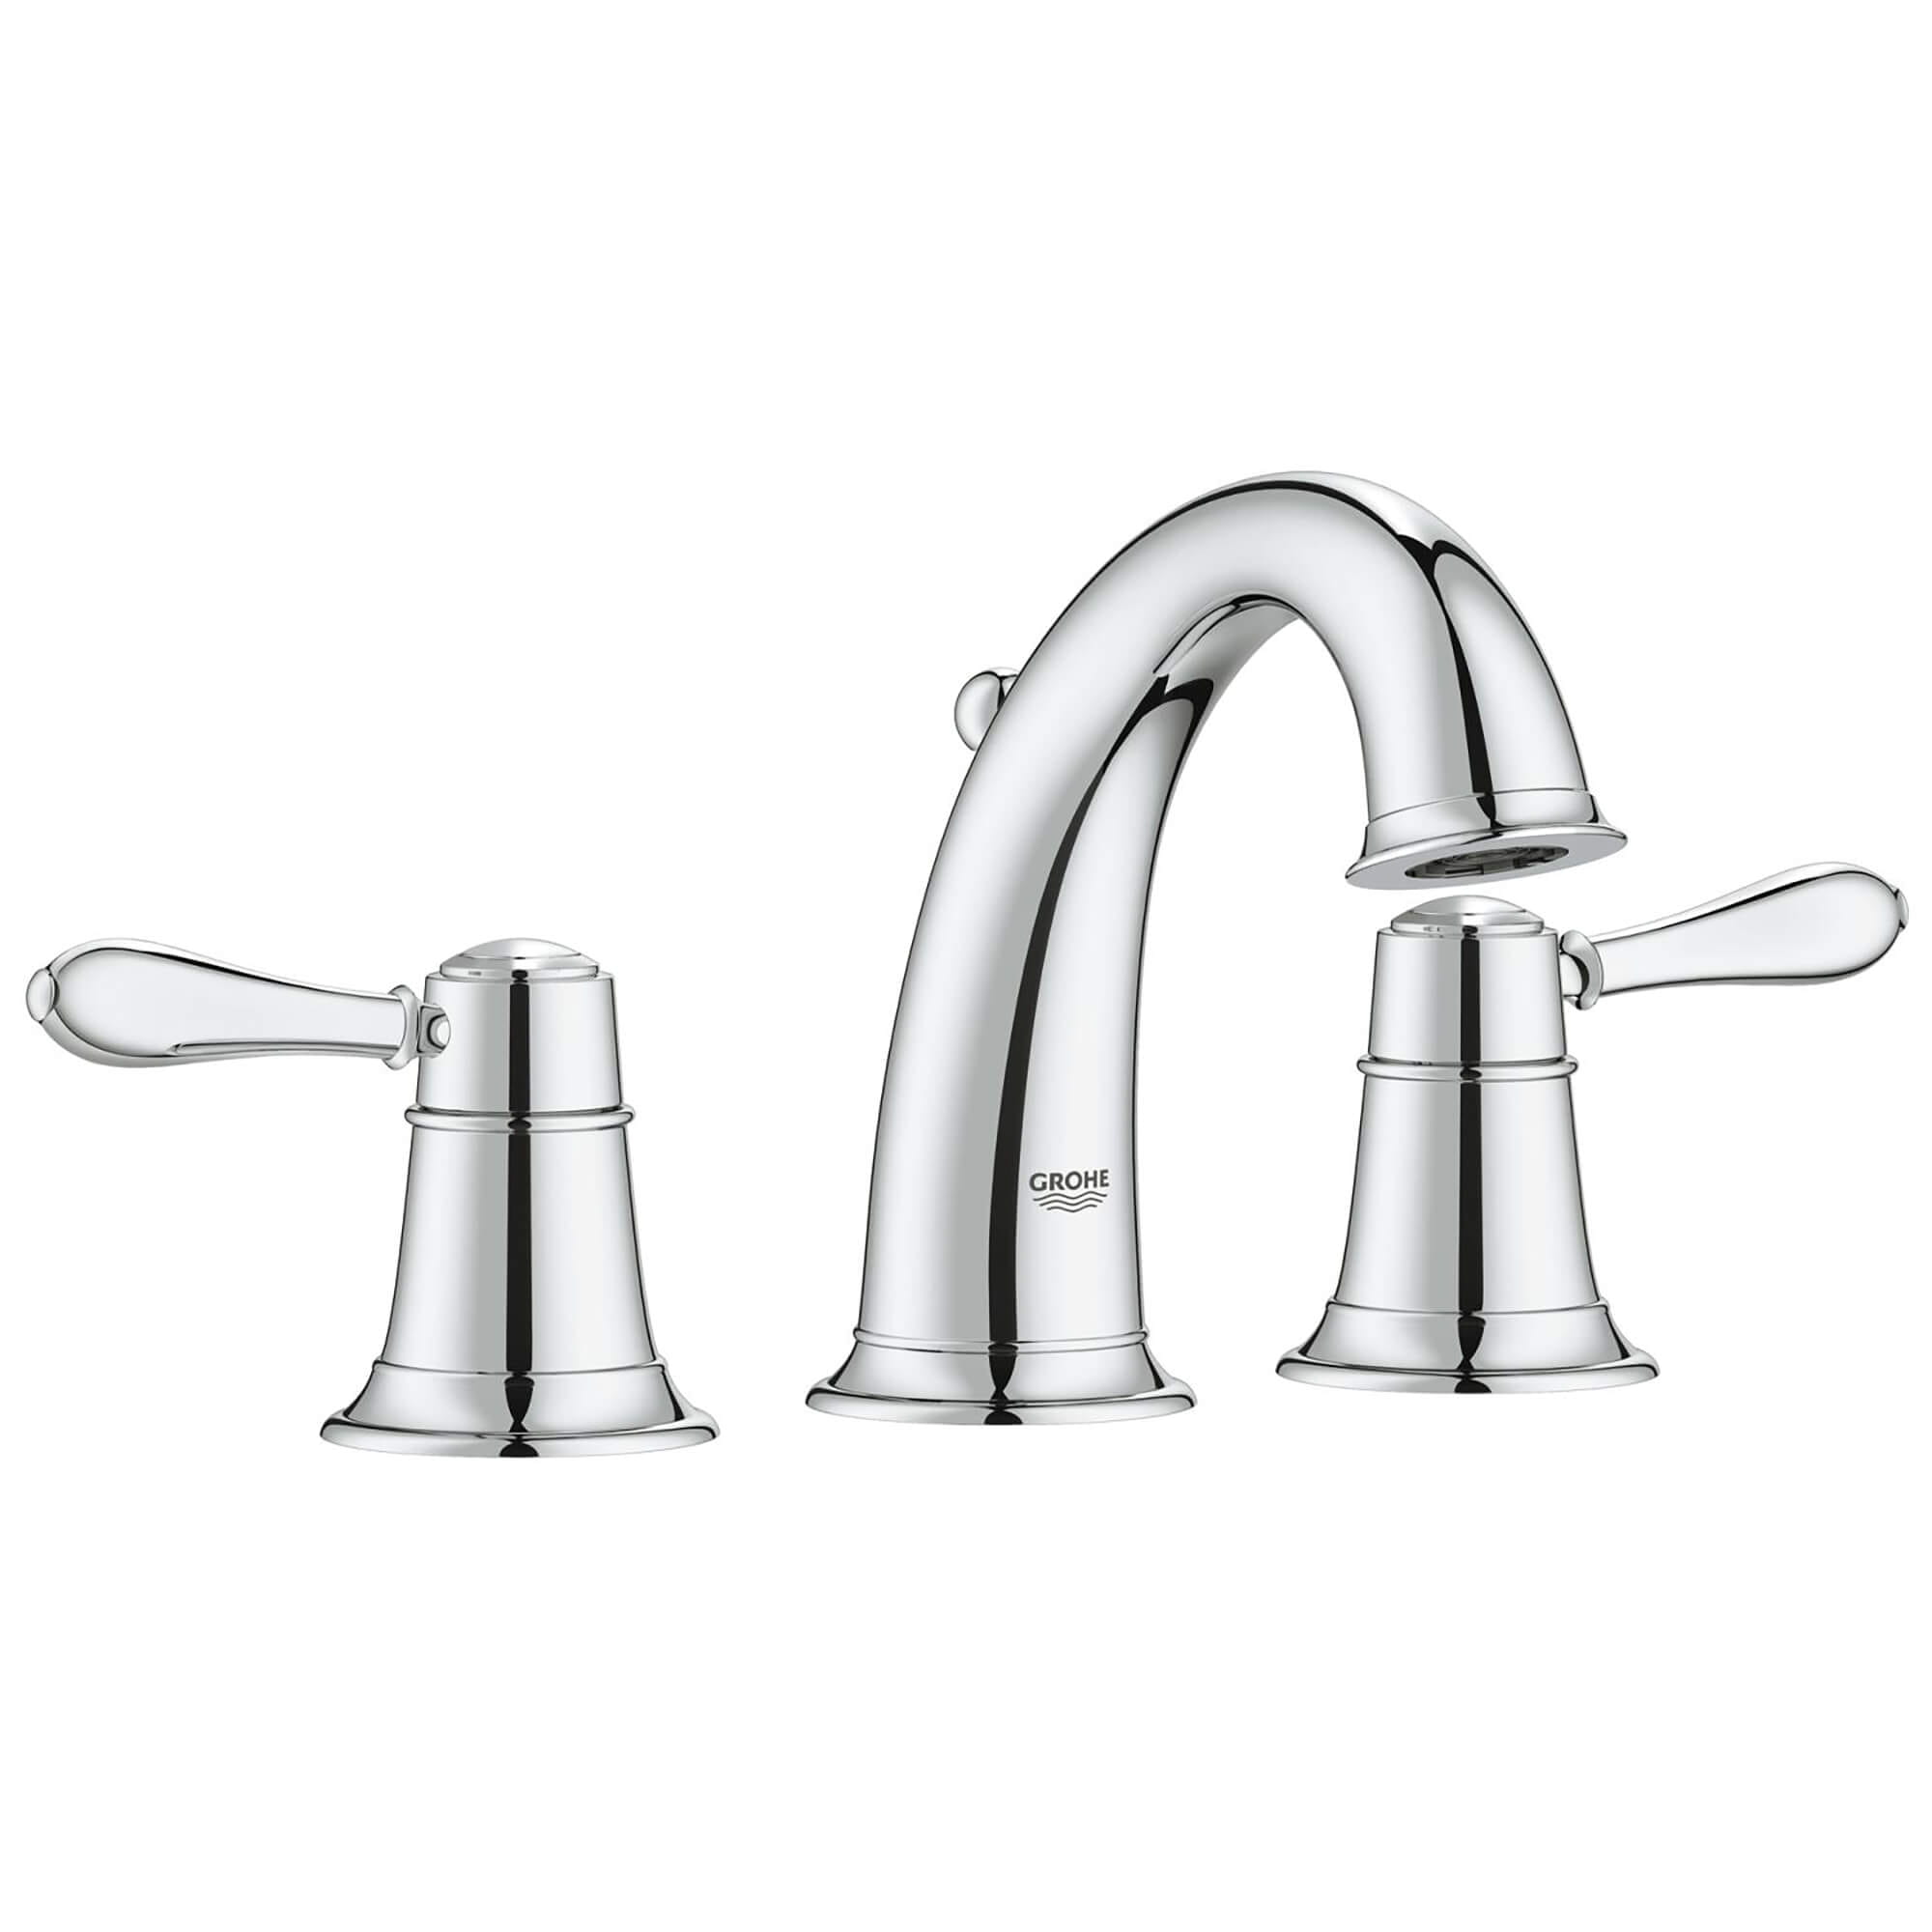 PREMIER COMMERCIAL 1895787 Touch-Free Lavatory Faucet with 4 Cover Plate Chrome 